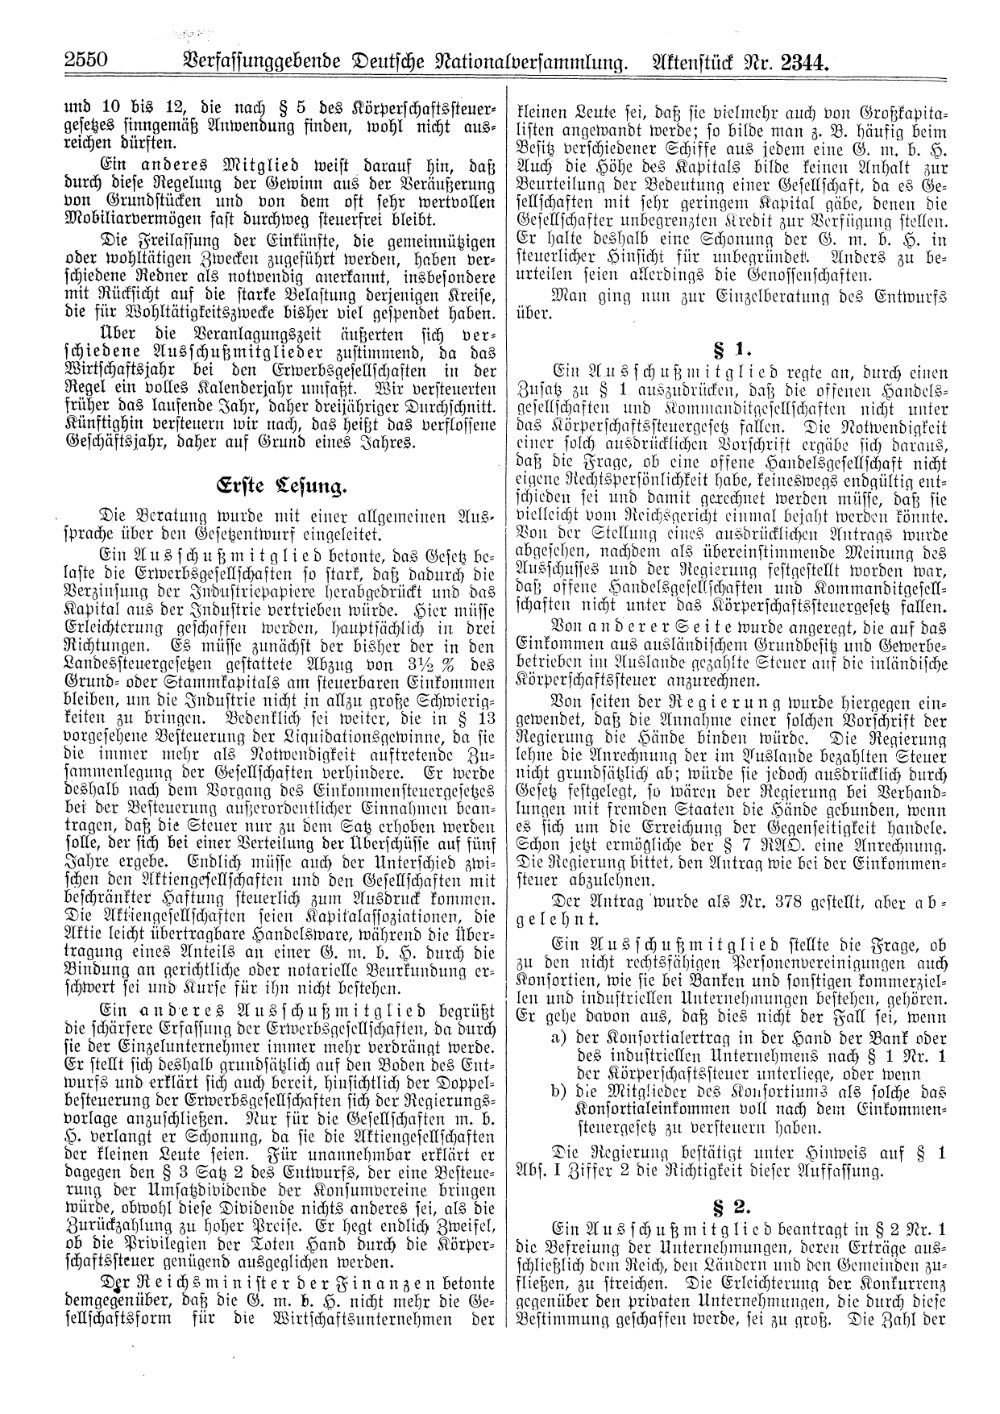 Scan of page 2550